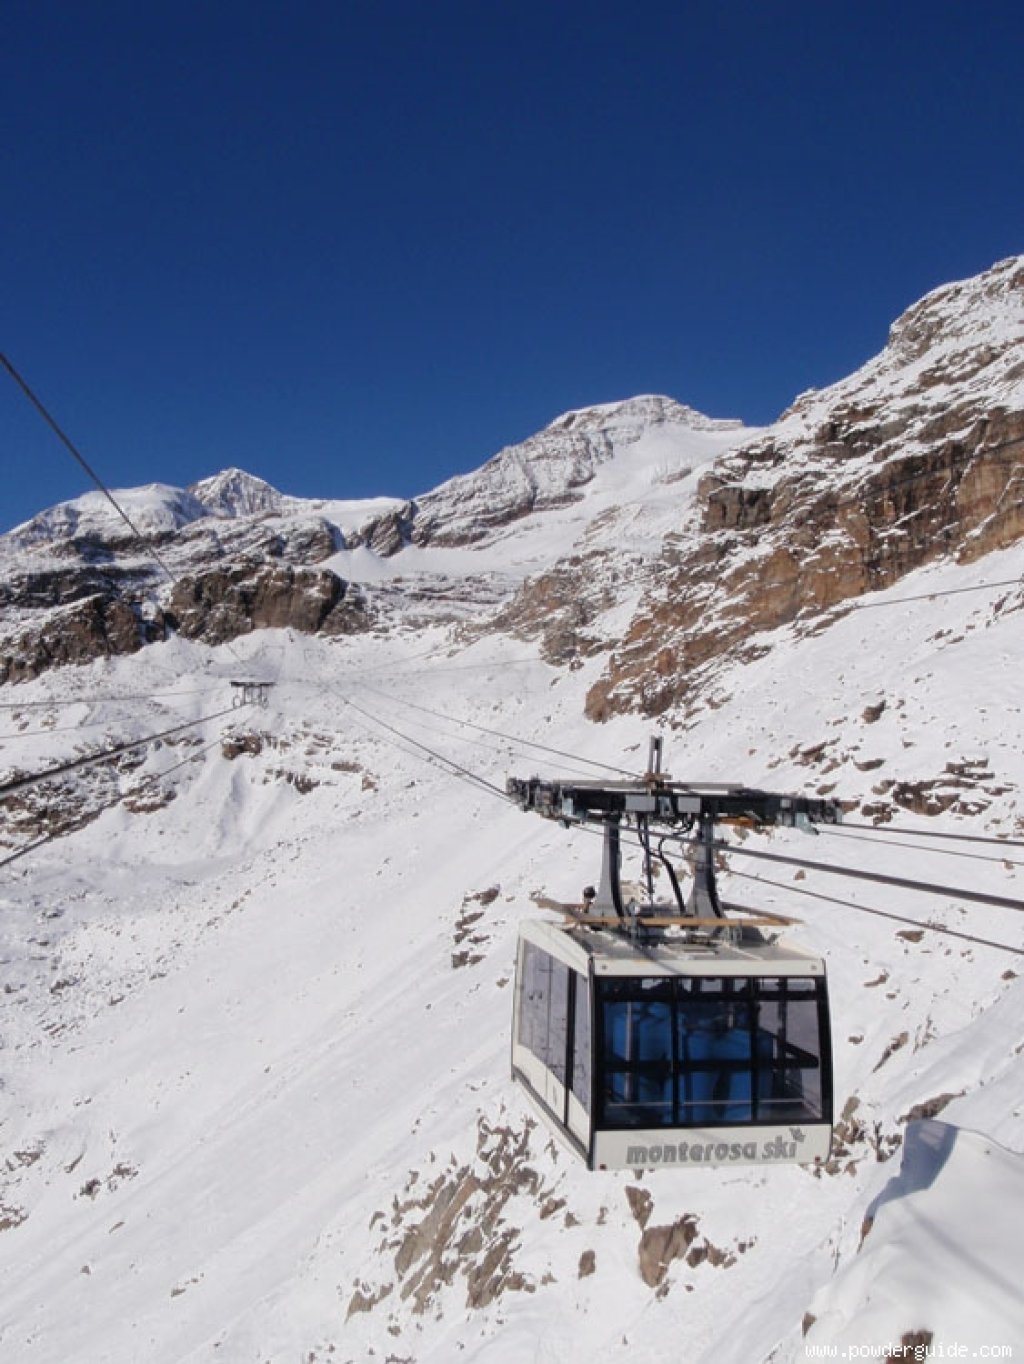 The new lift restores the magnificent freeride opportunities in the Alagna-Gressoney ski area.